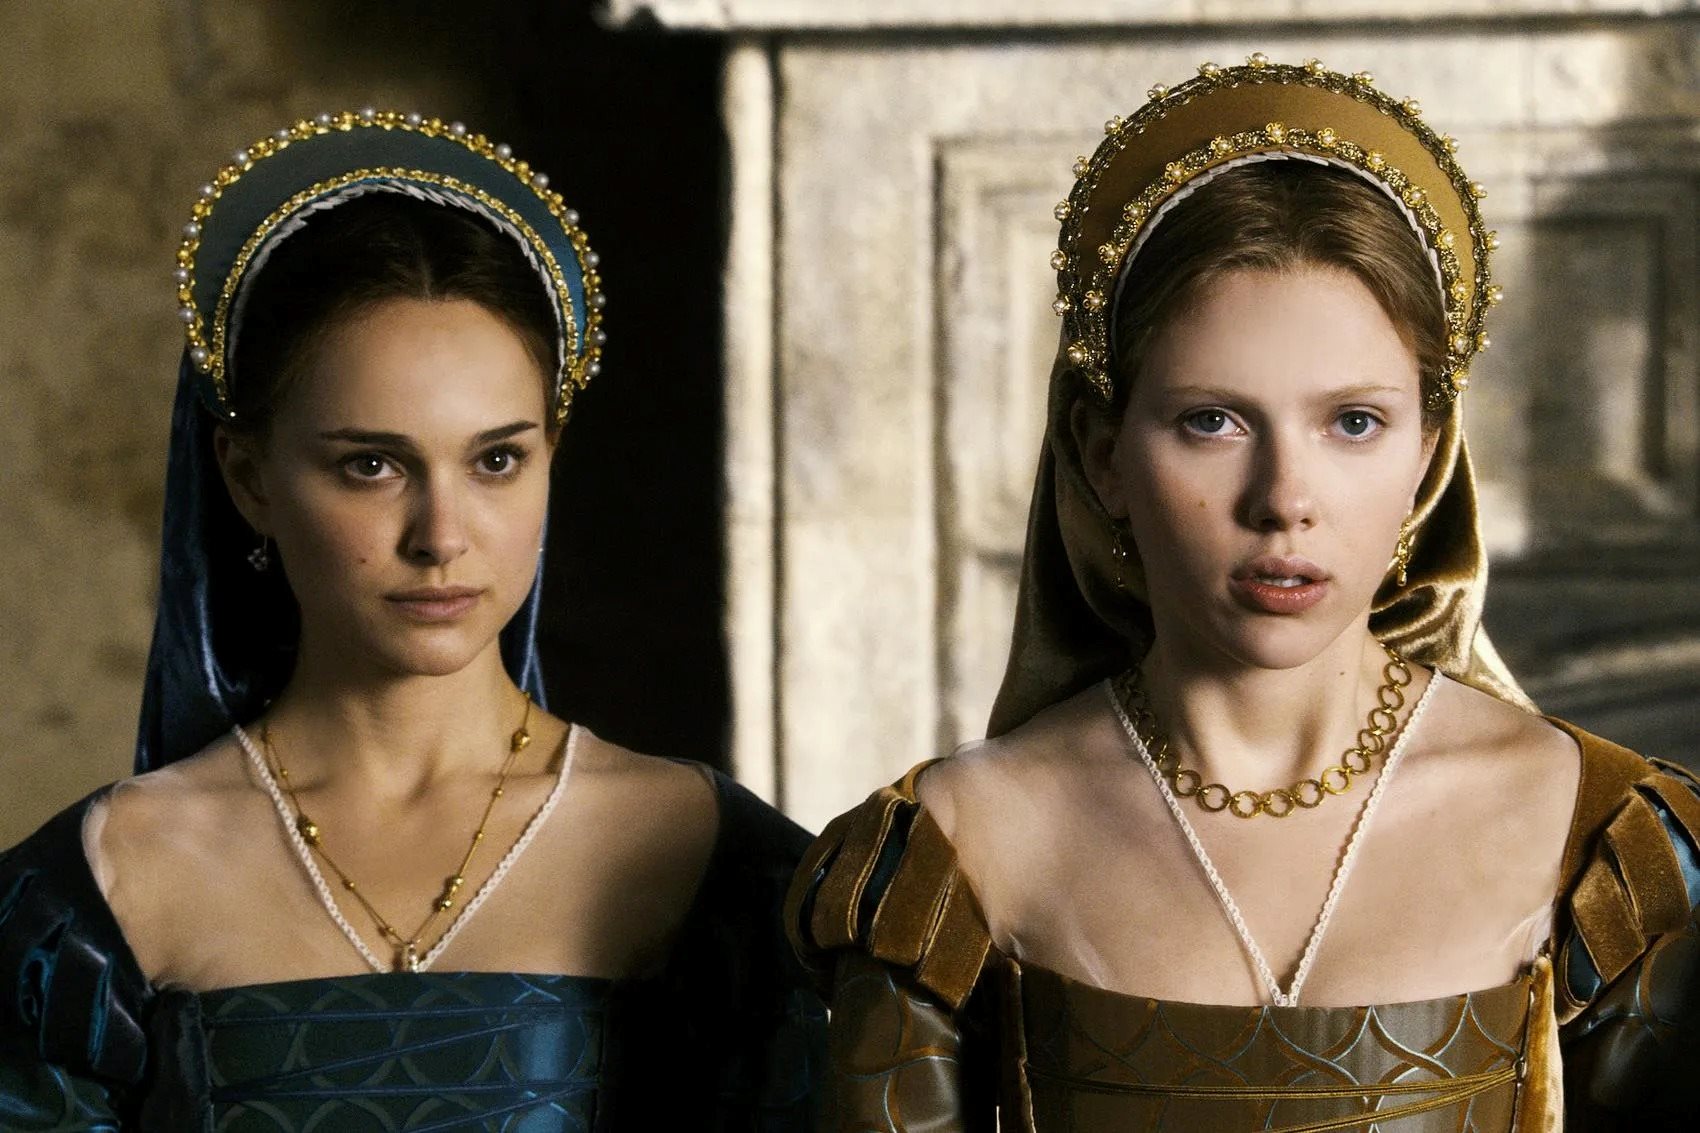 The Shocking Truth Behind 'The Other Boleyn Girl' Revealed: How Historically Accurate Was It?